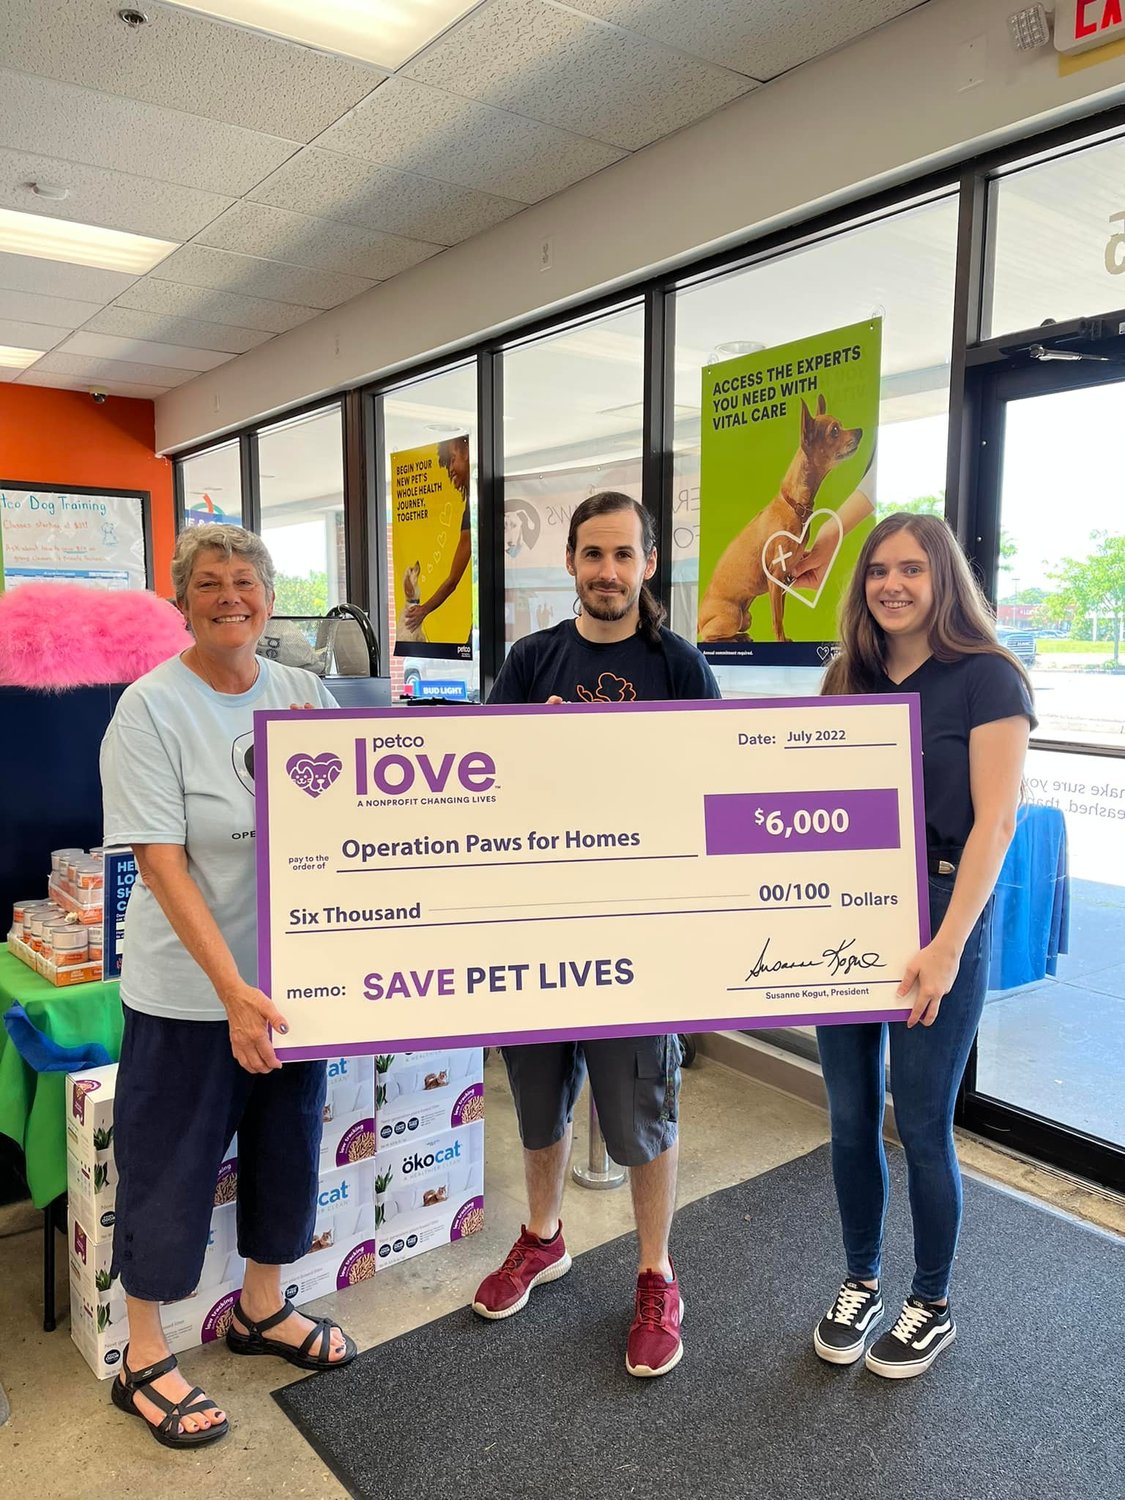 Operation Paws for Homes volunteer Nita Dressel received the Petco Love check from Severna Park Petco employees Steven Median and Amanda Clarke on July 12.